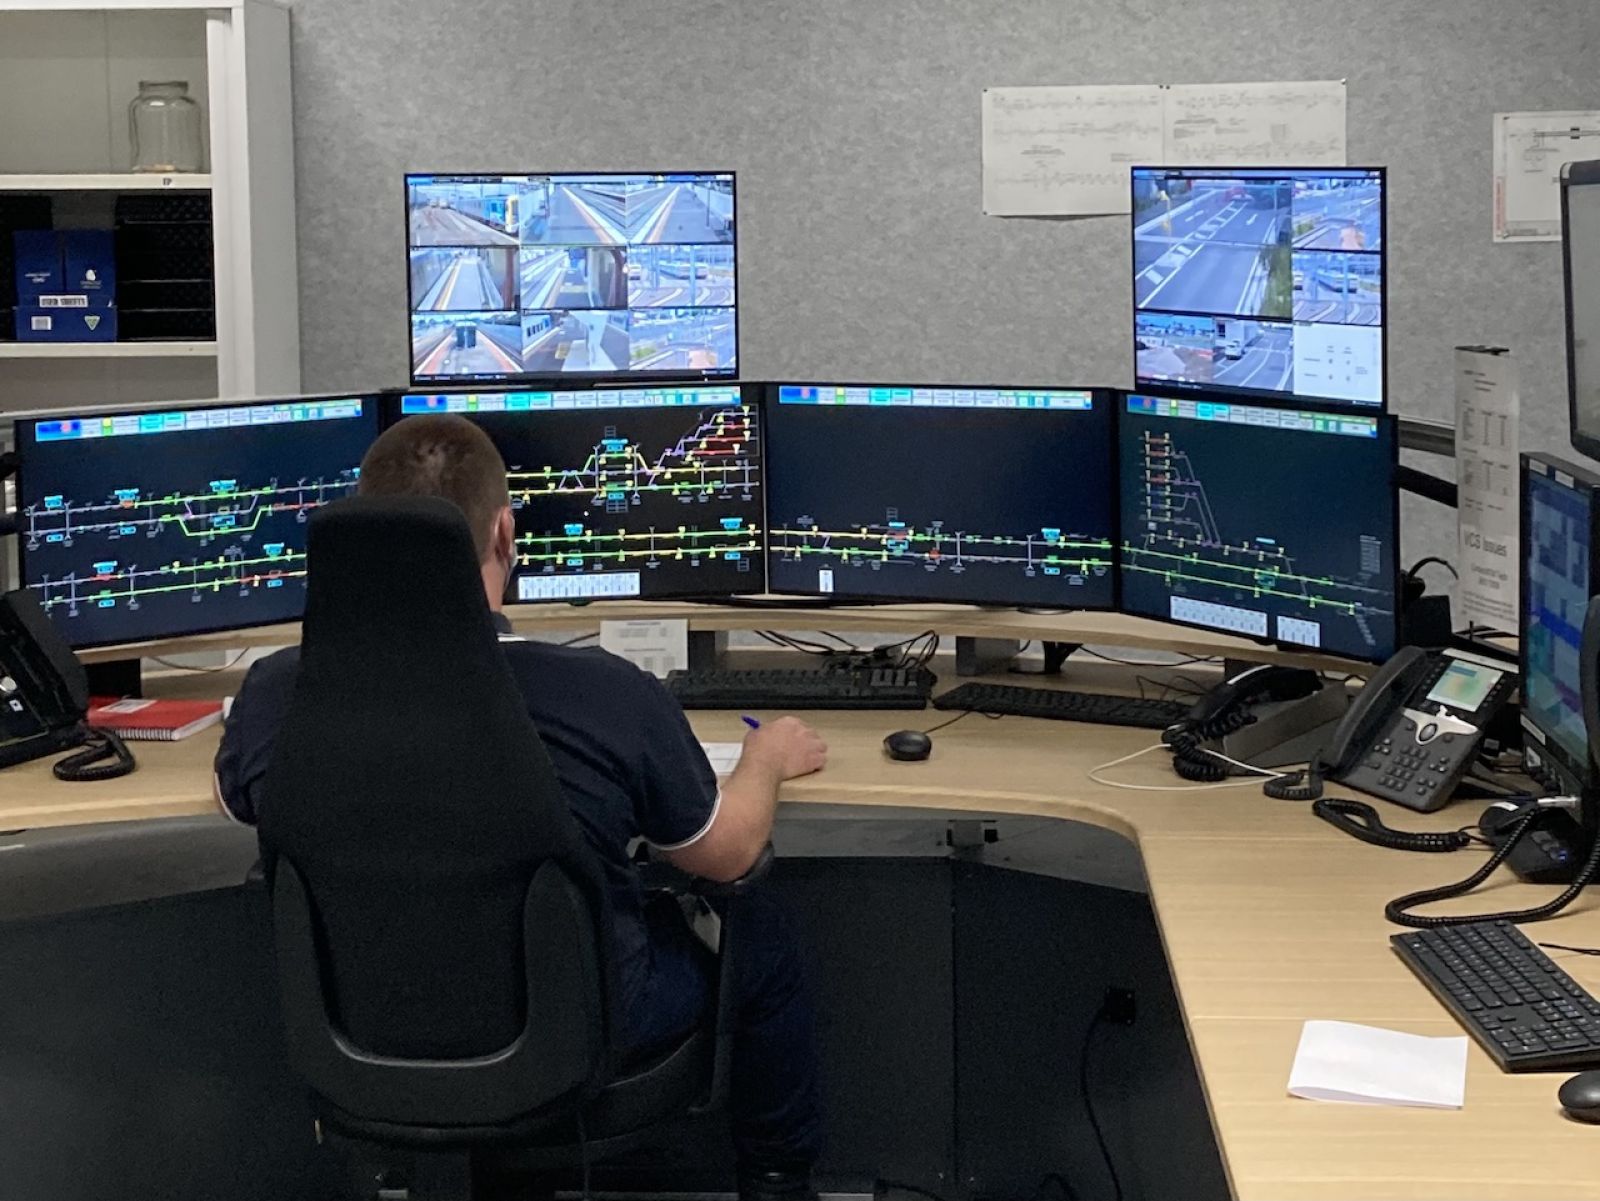 A worker watching multiple computer screens, observing the train network and signals.